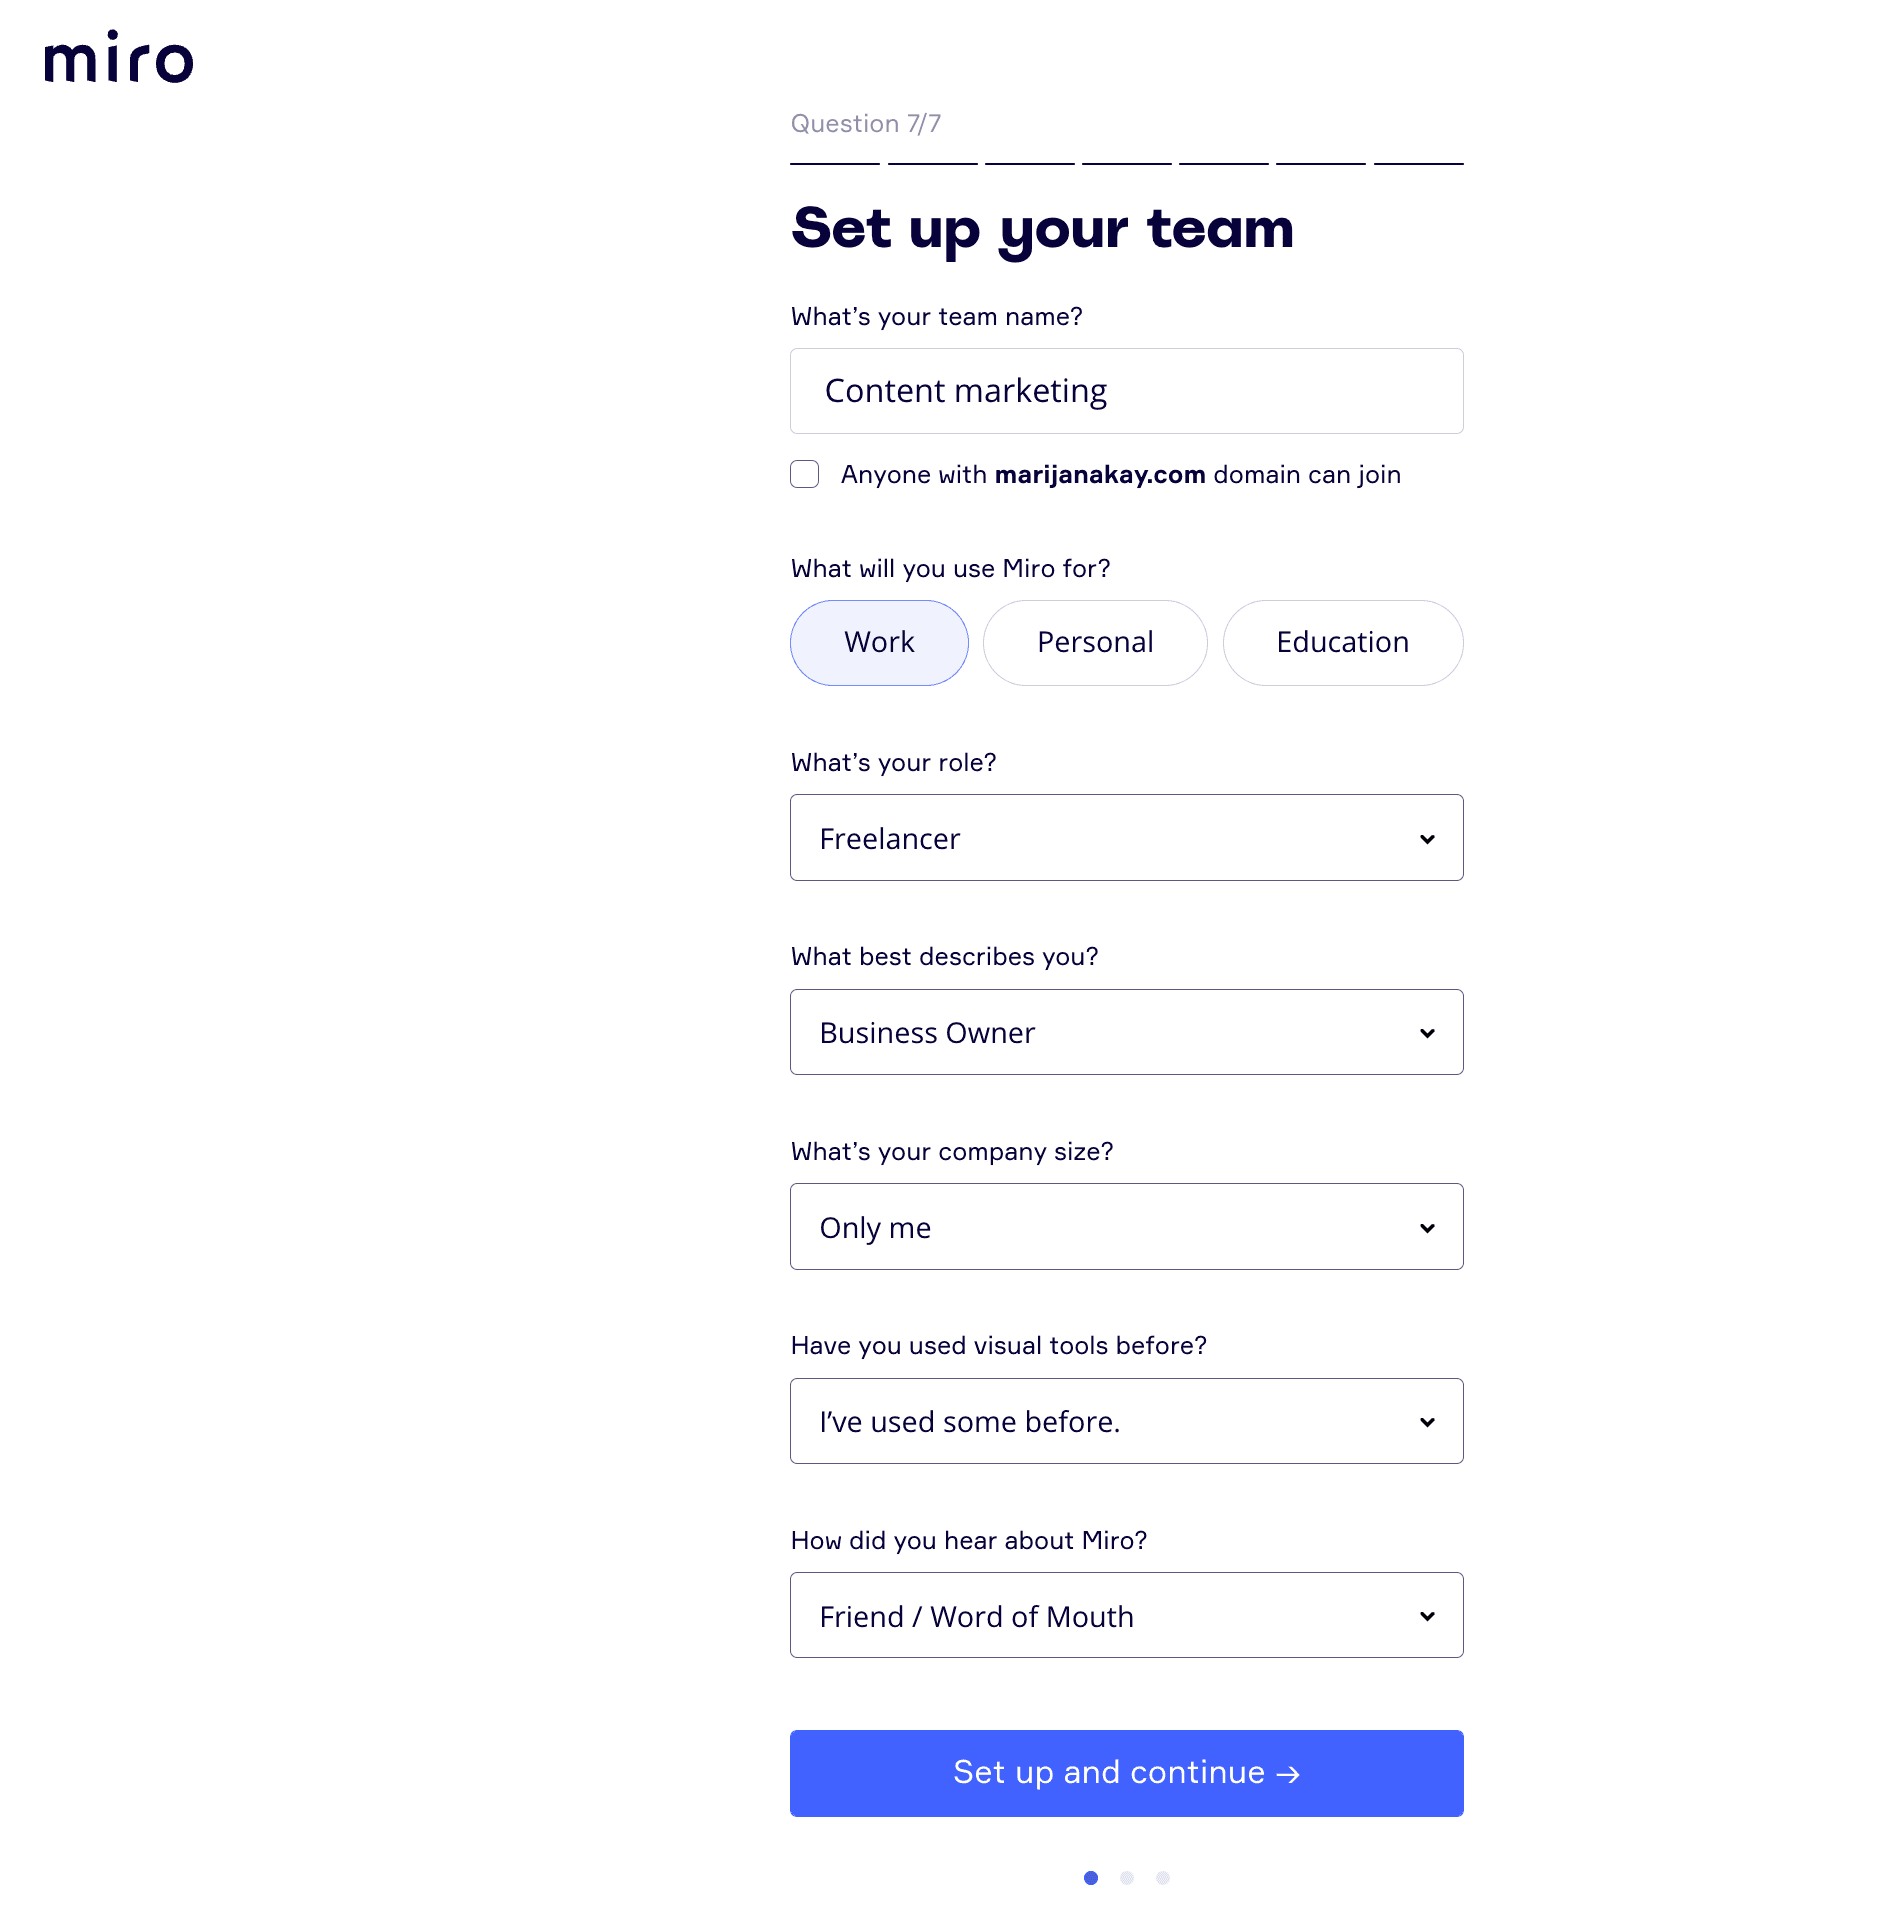 A screenshot from the Miro website, questions asked customers during their onboarding experience.